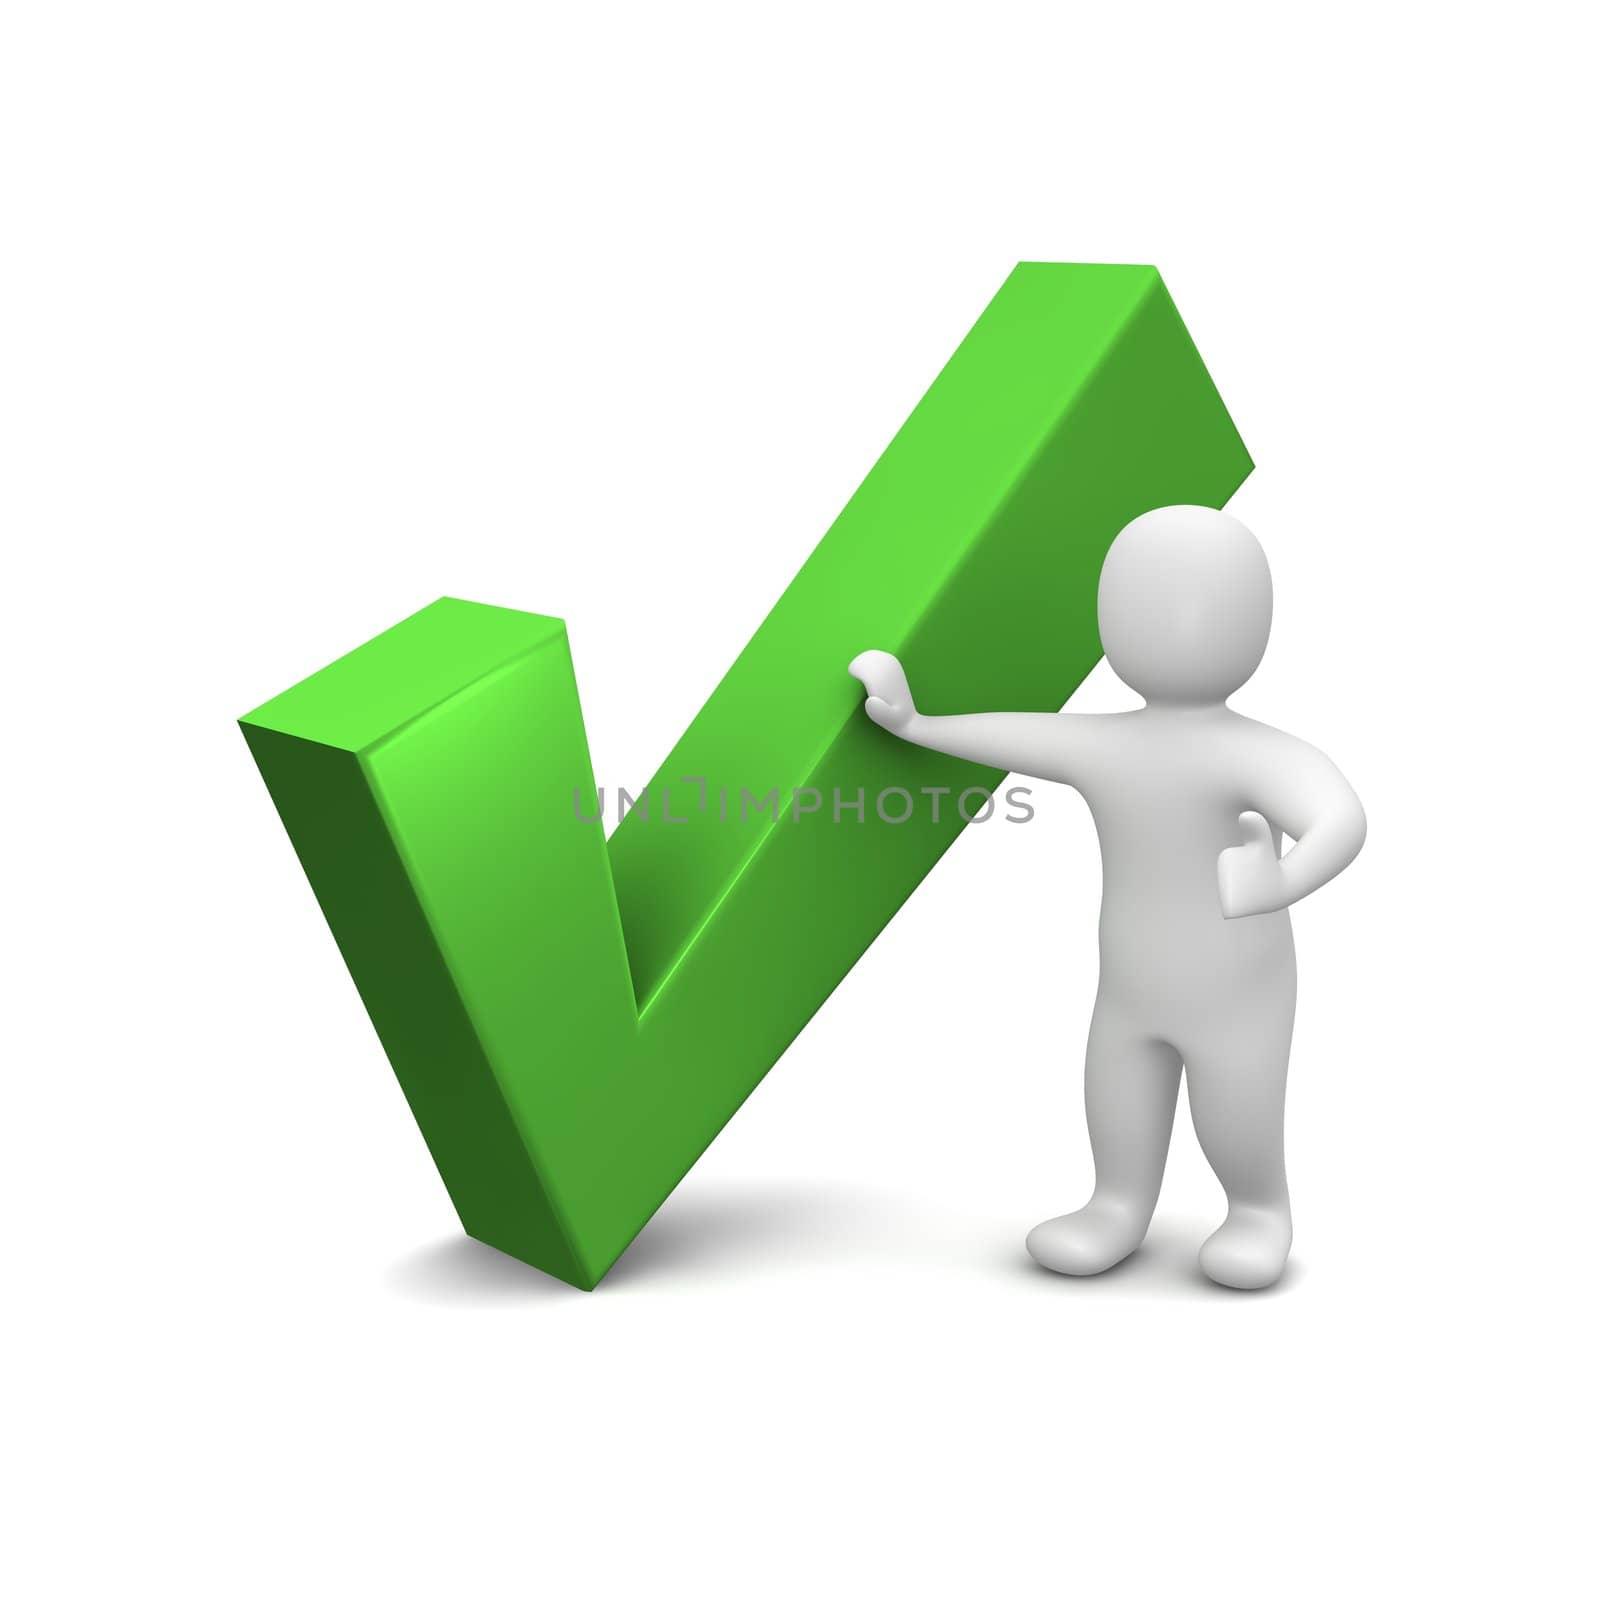 Man and green check mark. 3d rendered illustration.